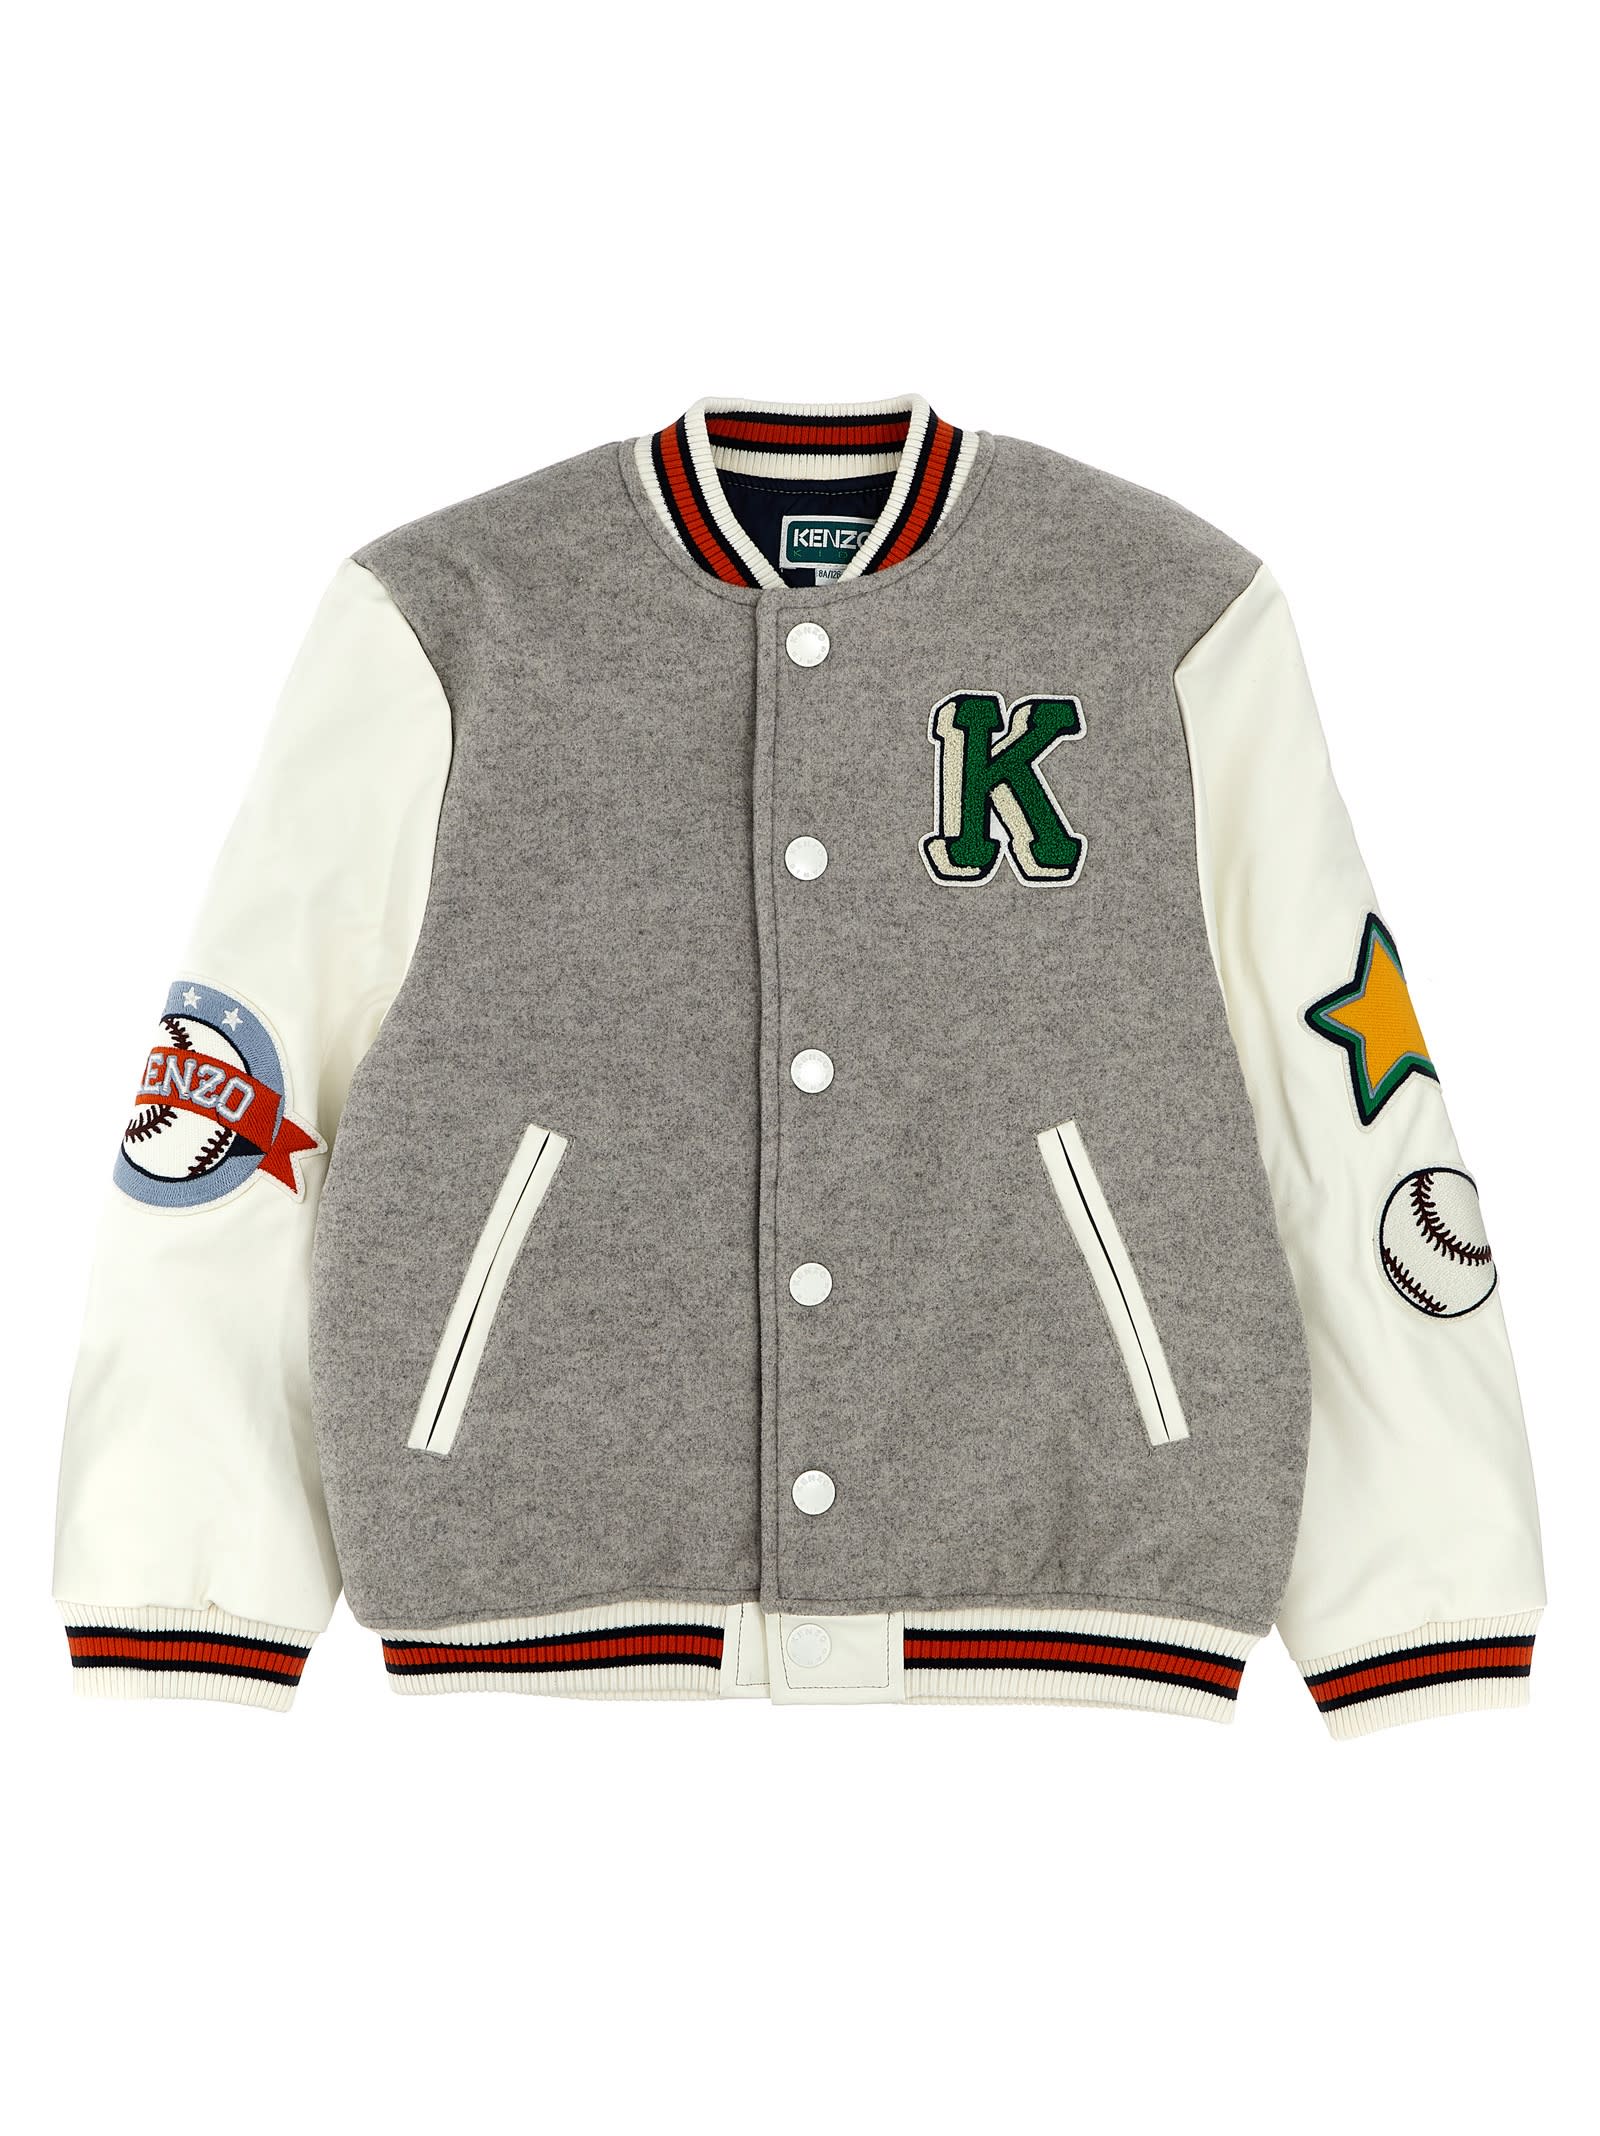 KENZO EMBROIDERY PATCHES BOMBER JACKET